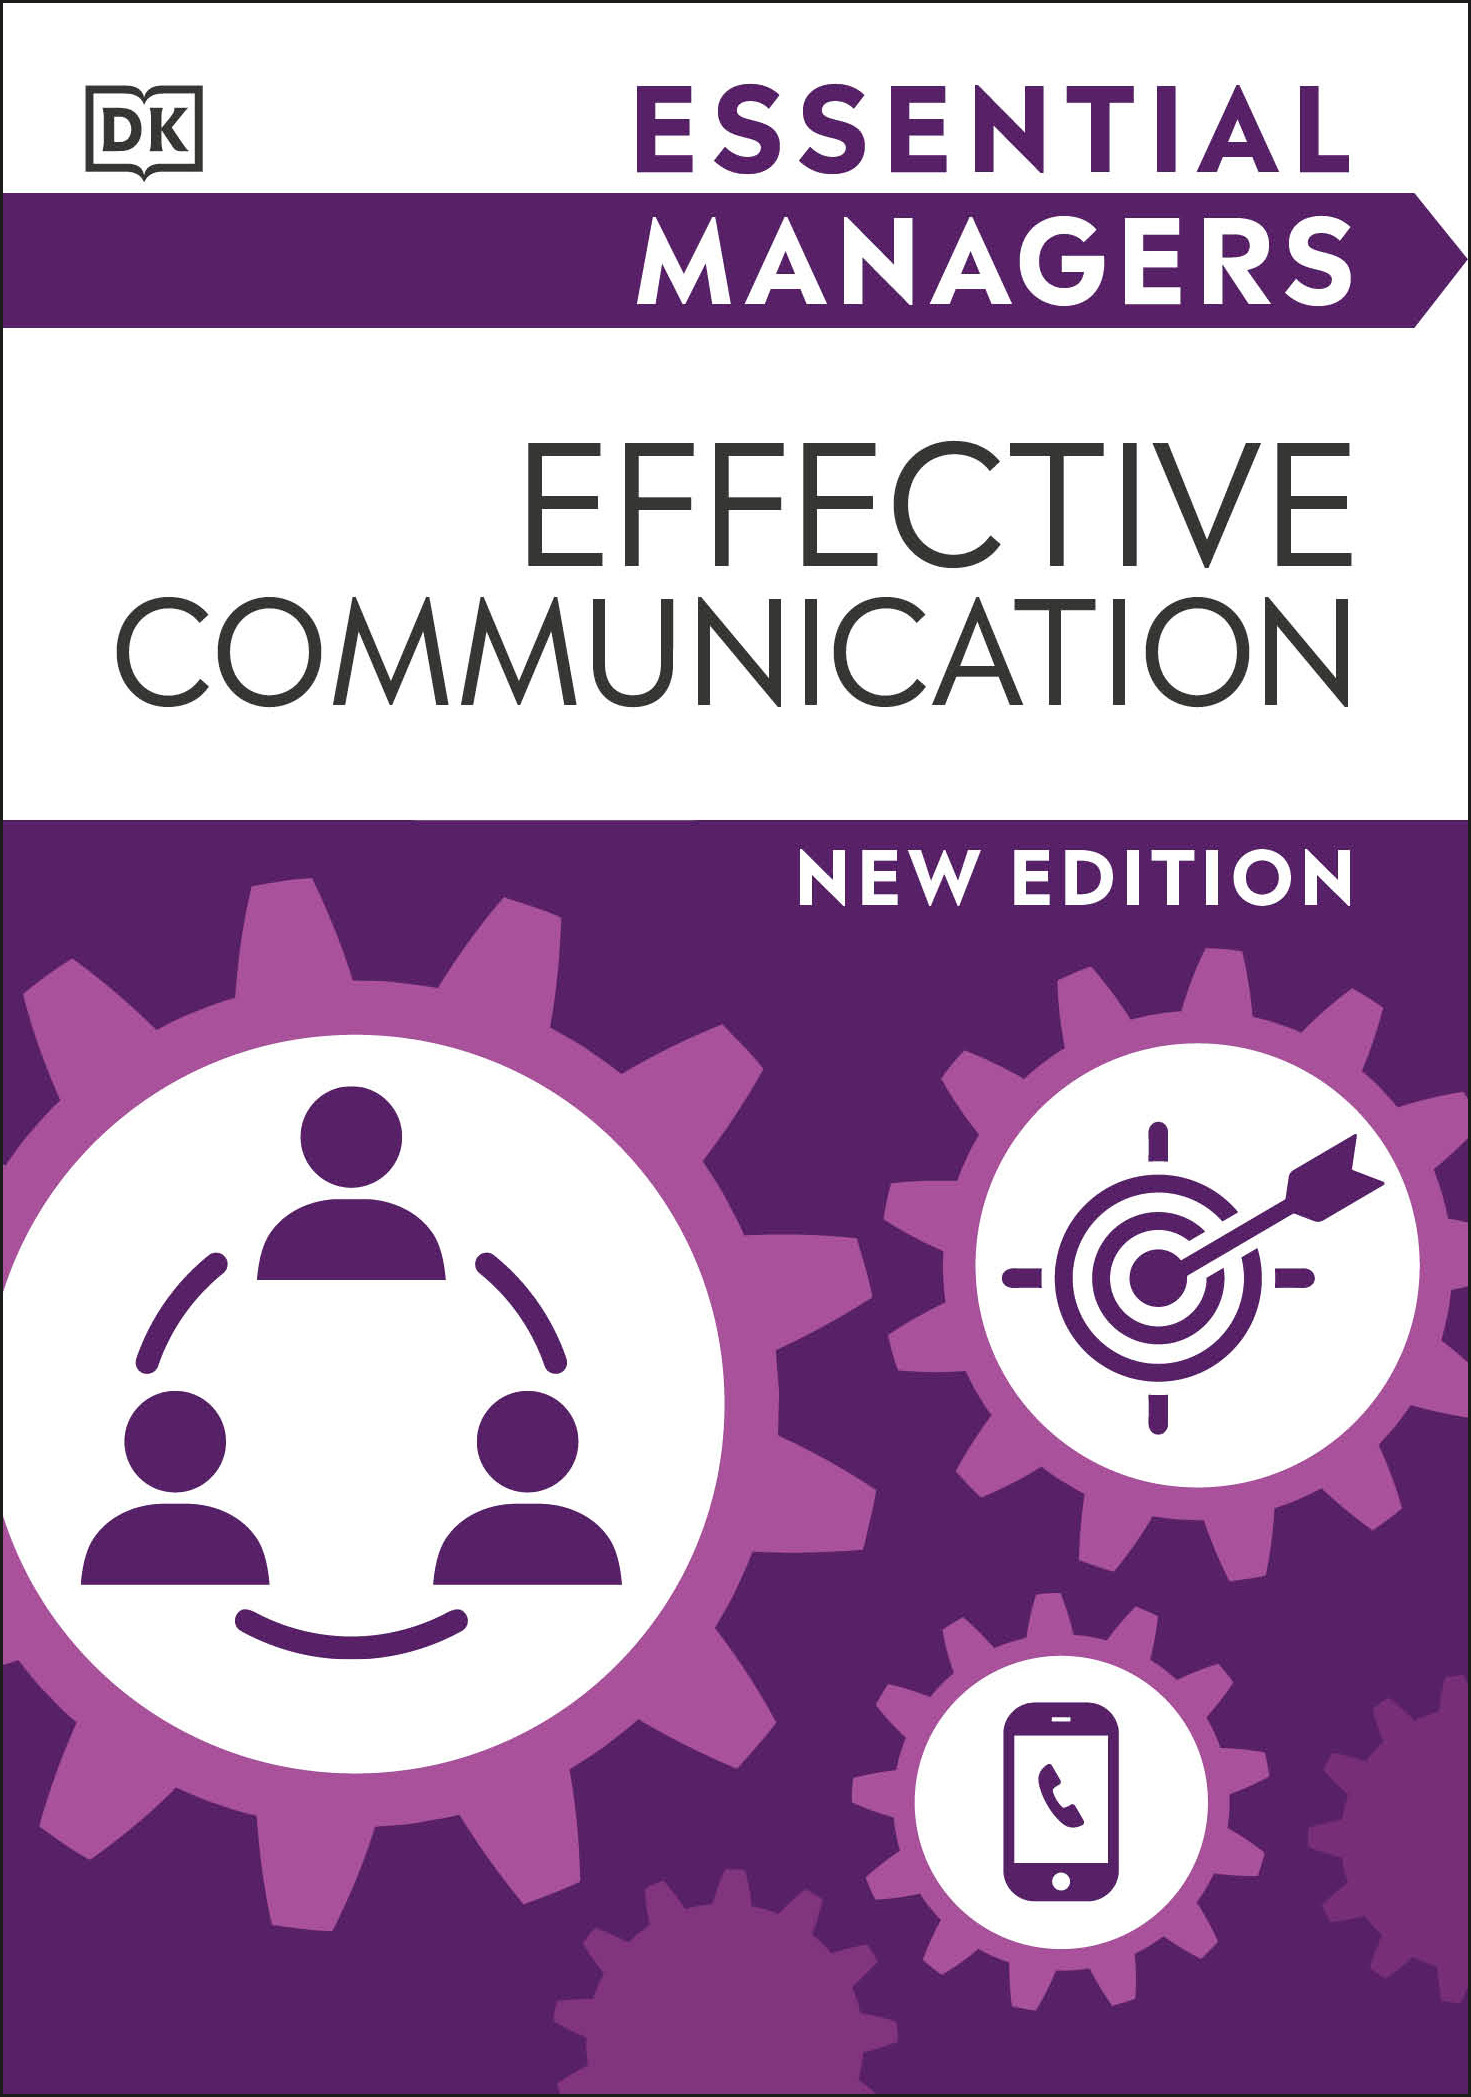 Essential Managers Effective Communication | Business & Management